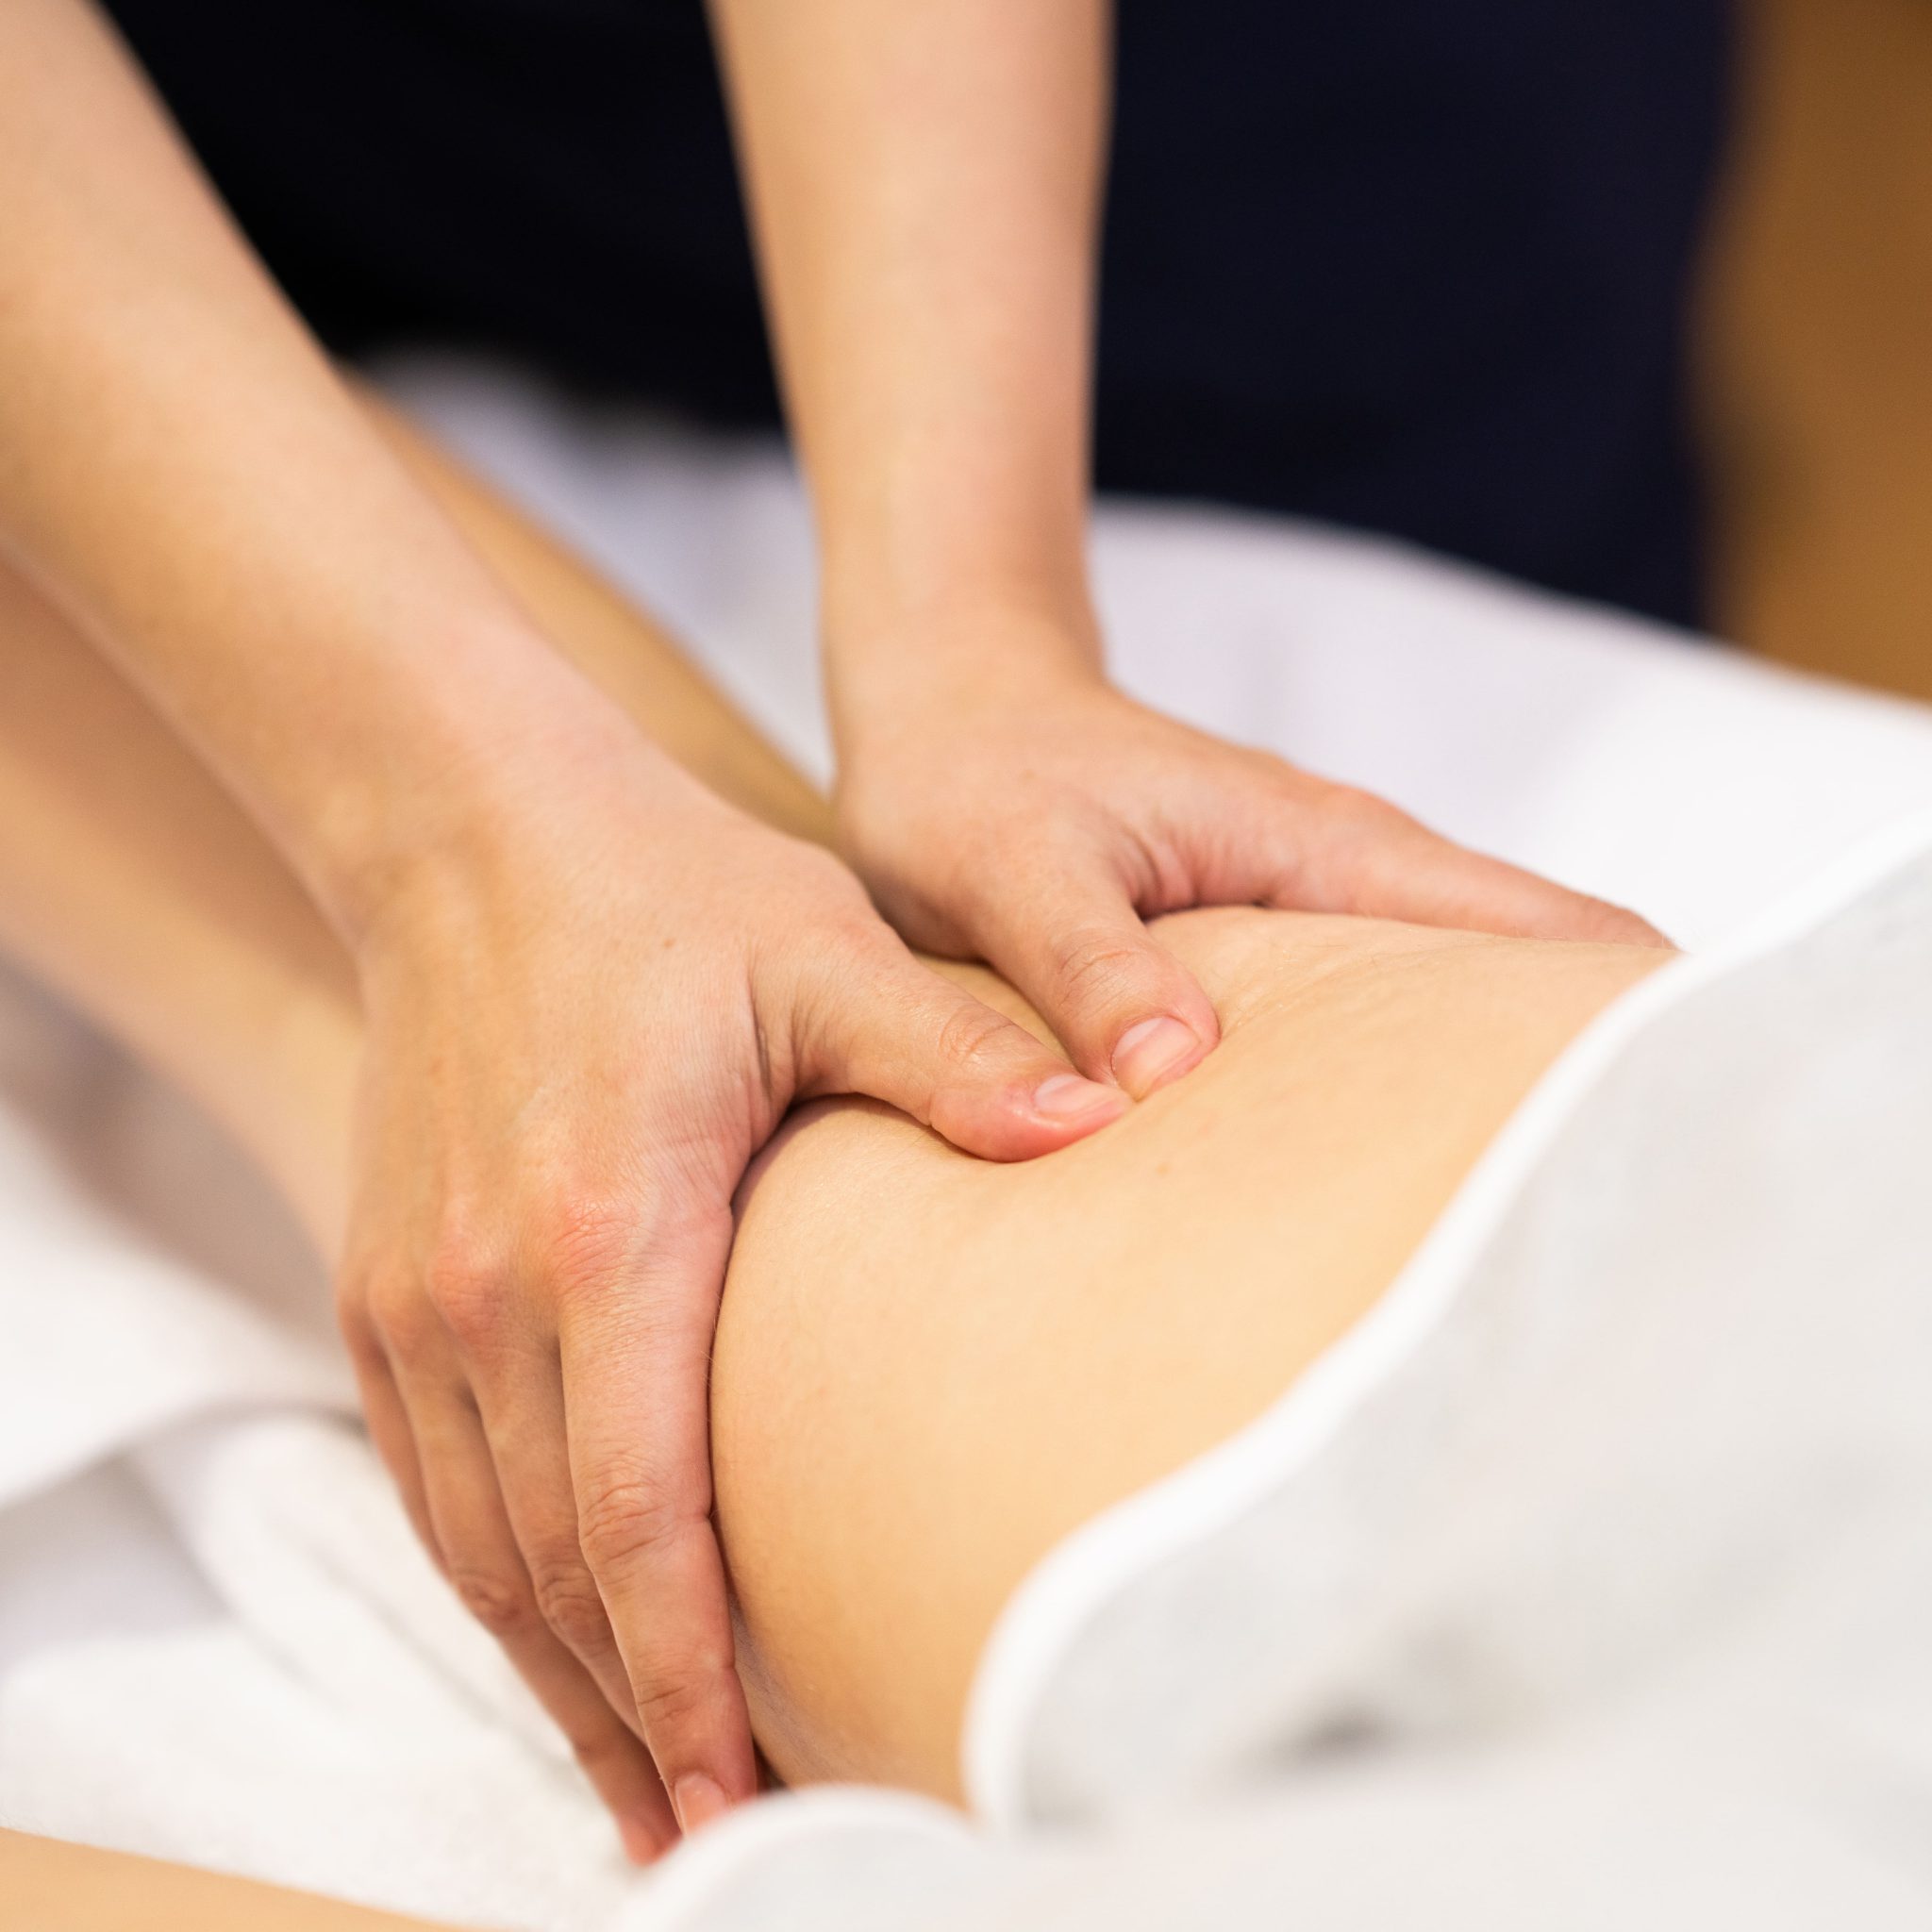 medical-massage-at-the-leg-in-a-physiotherapy-cent-H76QKD8